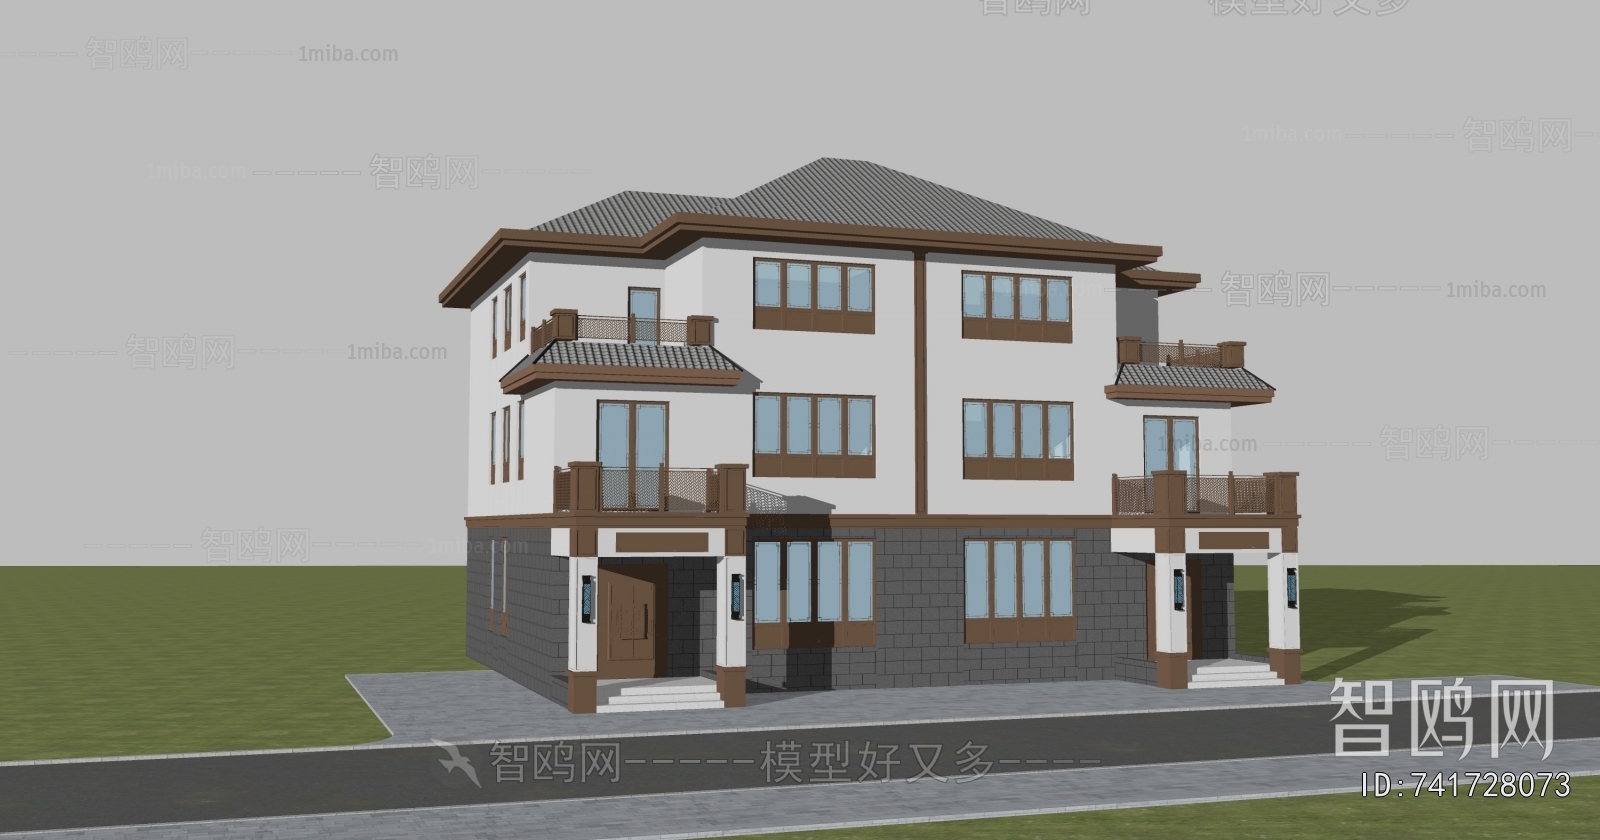 New Chinese Style Double Townhouse